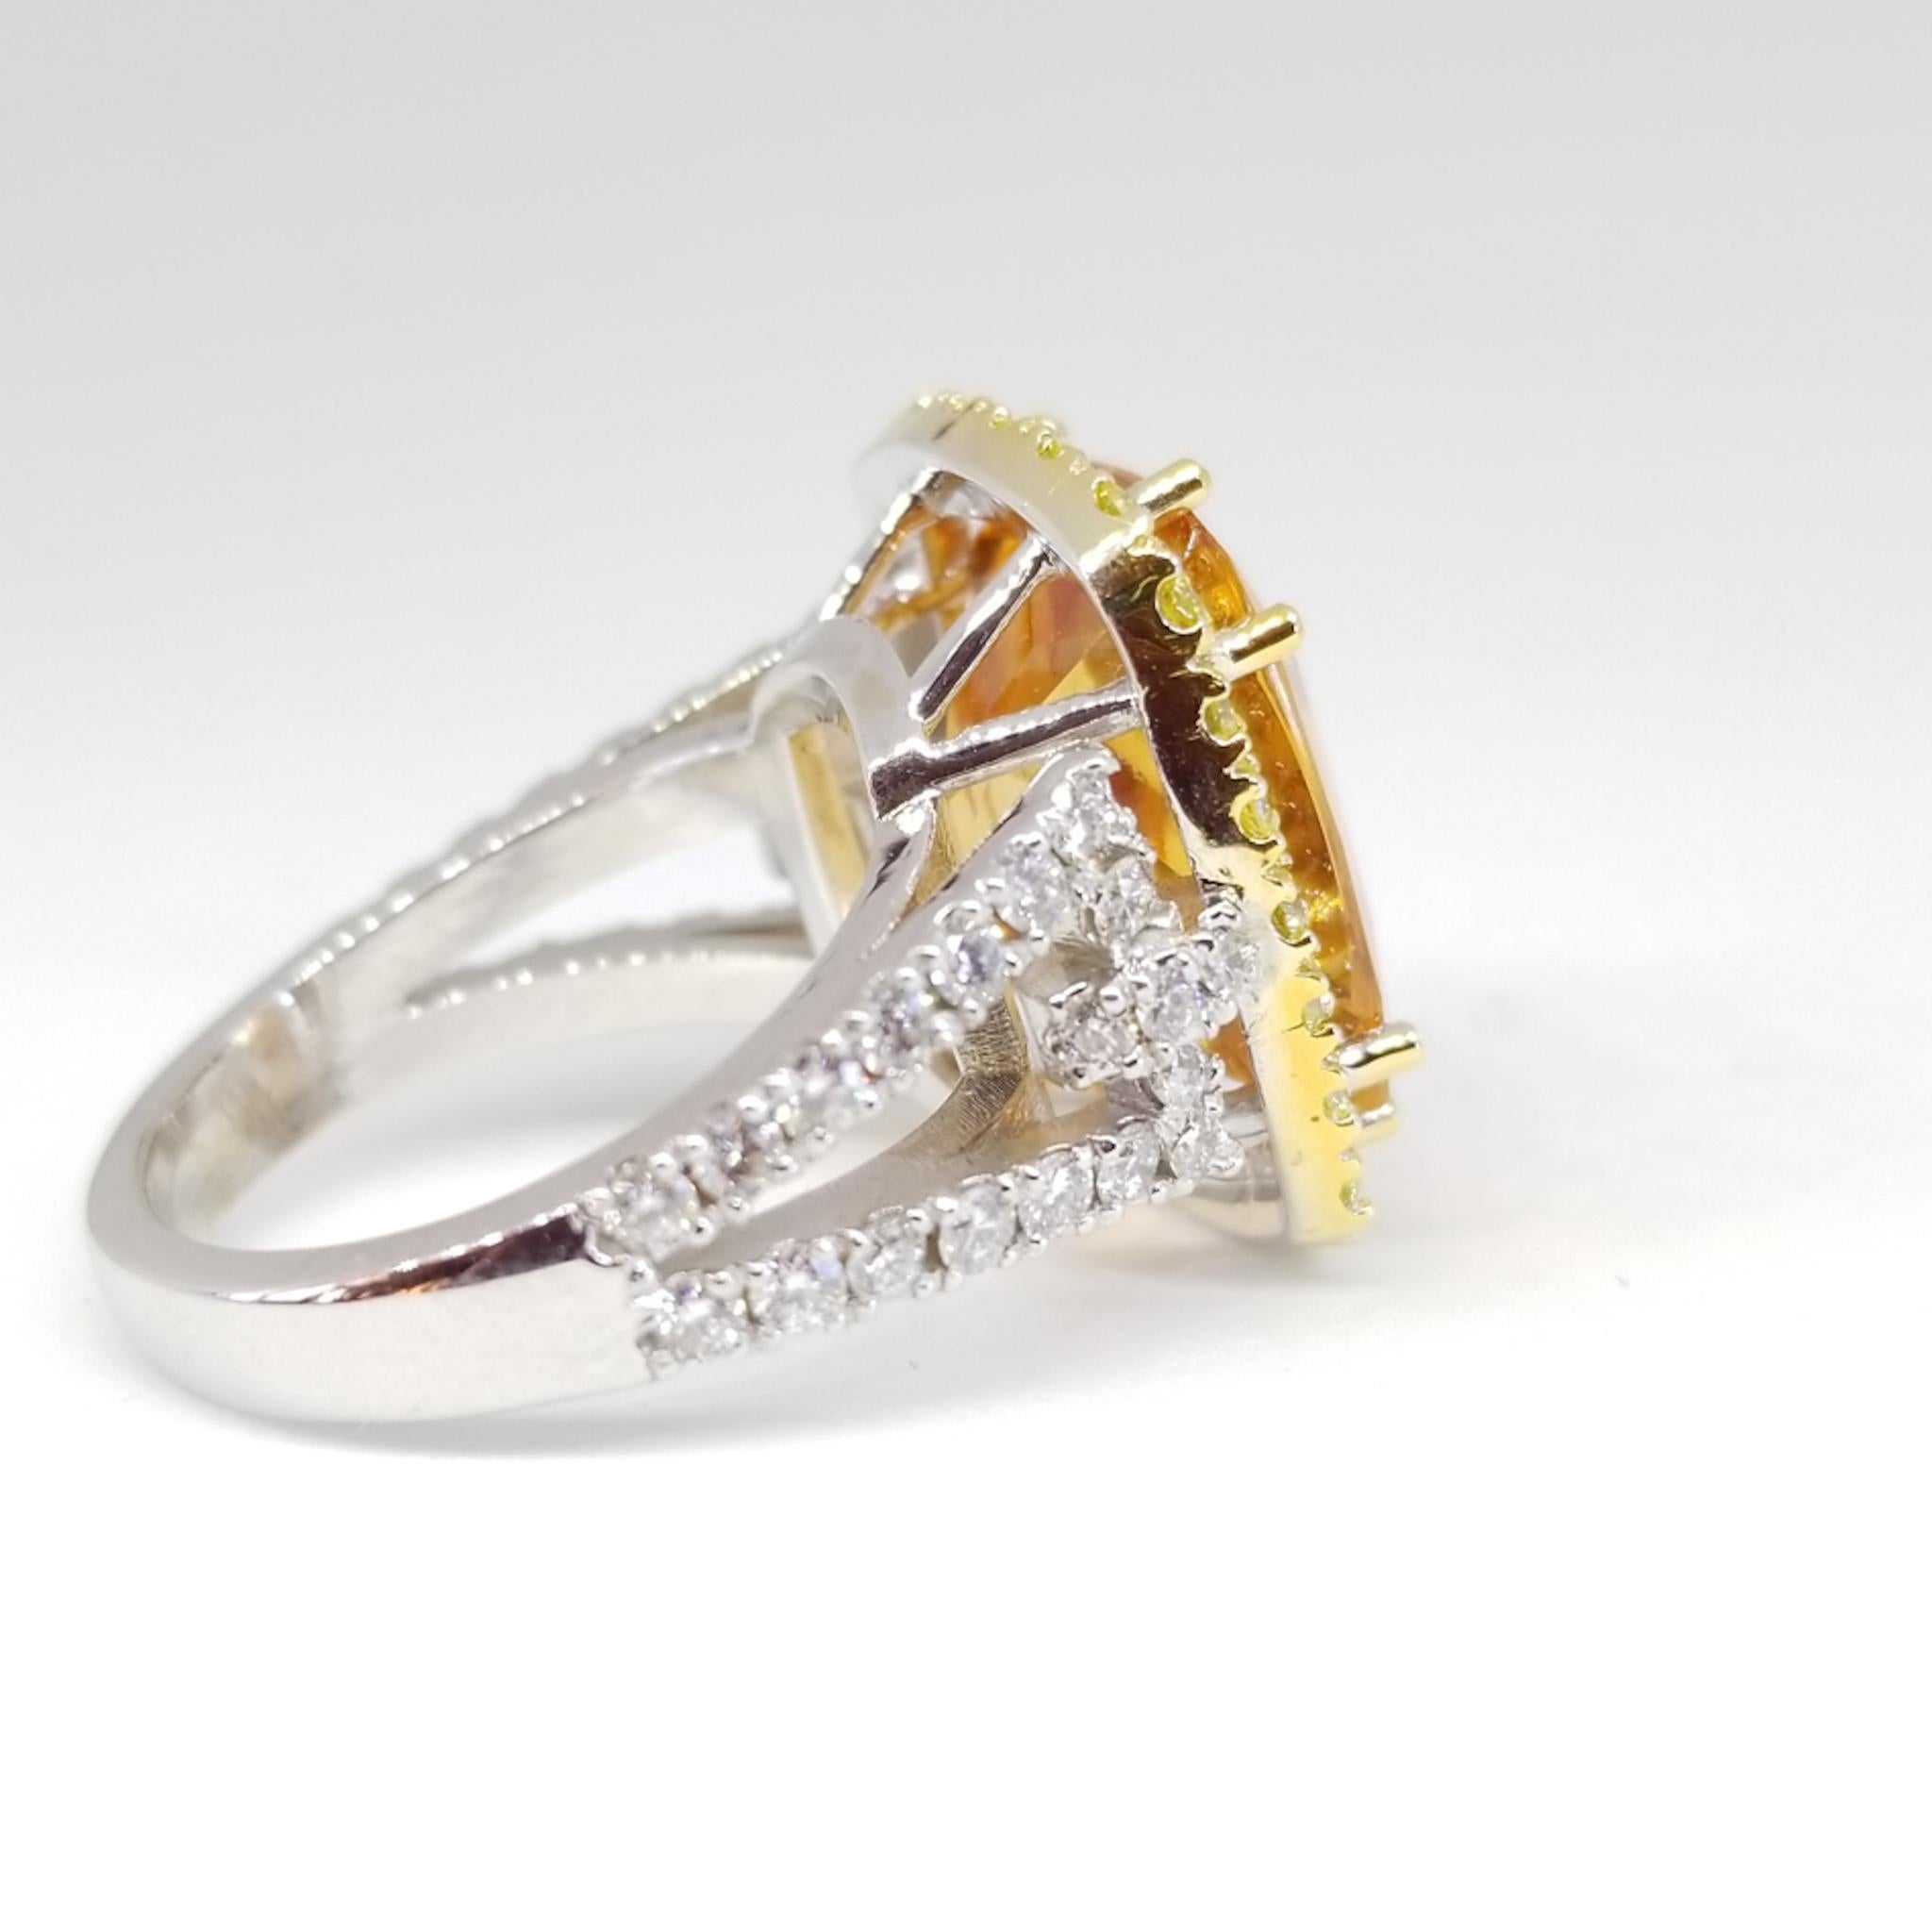 13.46 Carat Natural Grossular Garnet 1.75 Carat Canary and White Diamond Ring For Sale 2